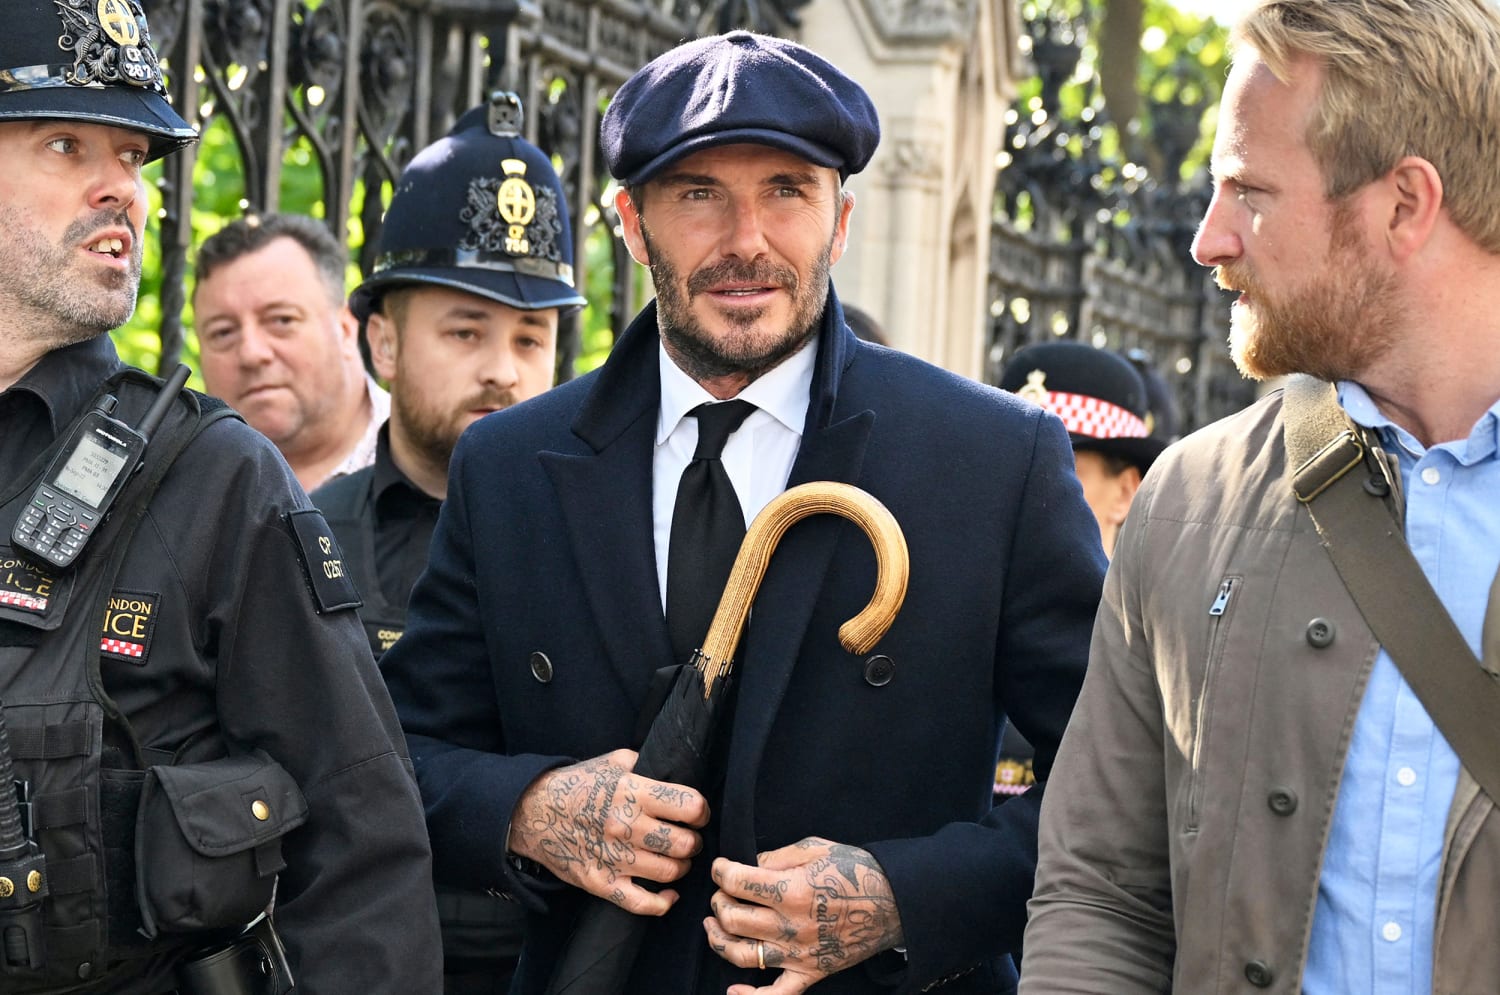 David Beckham keeps it casual as he takes to the streets of Rio de